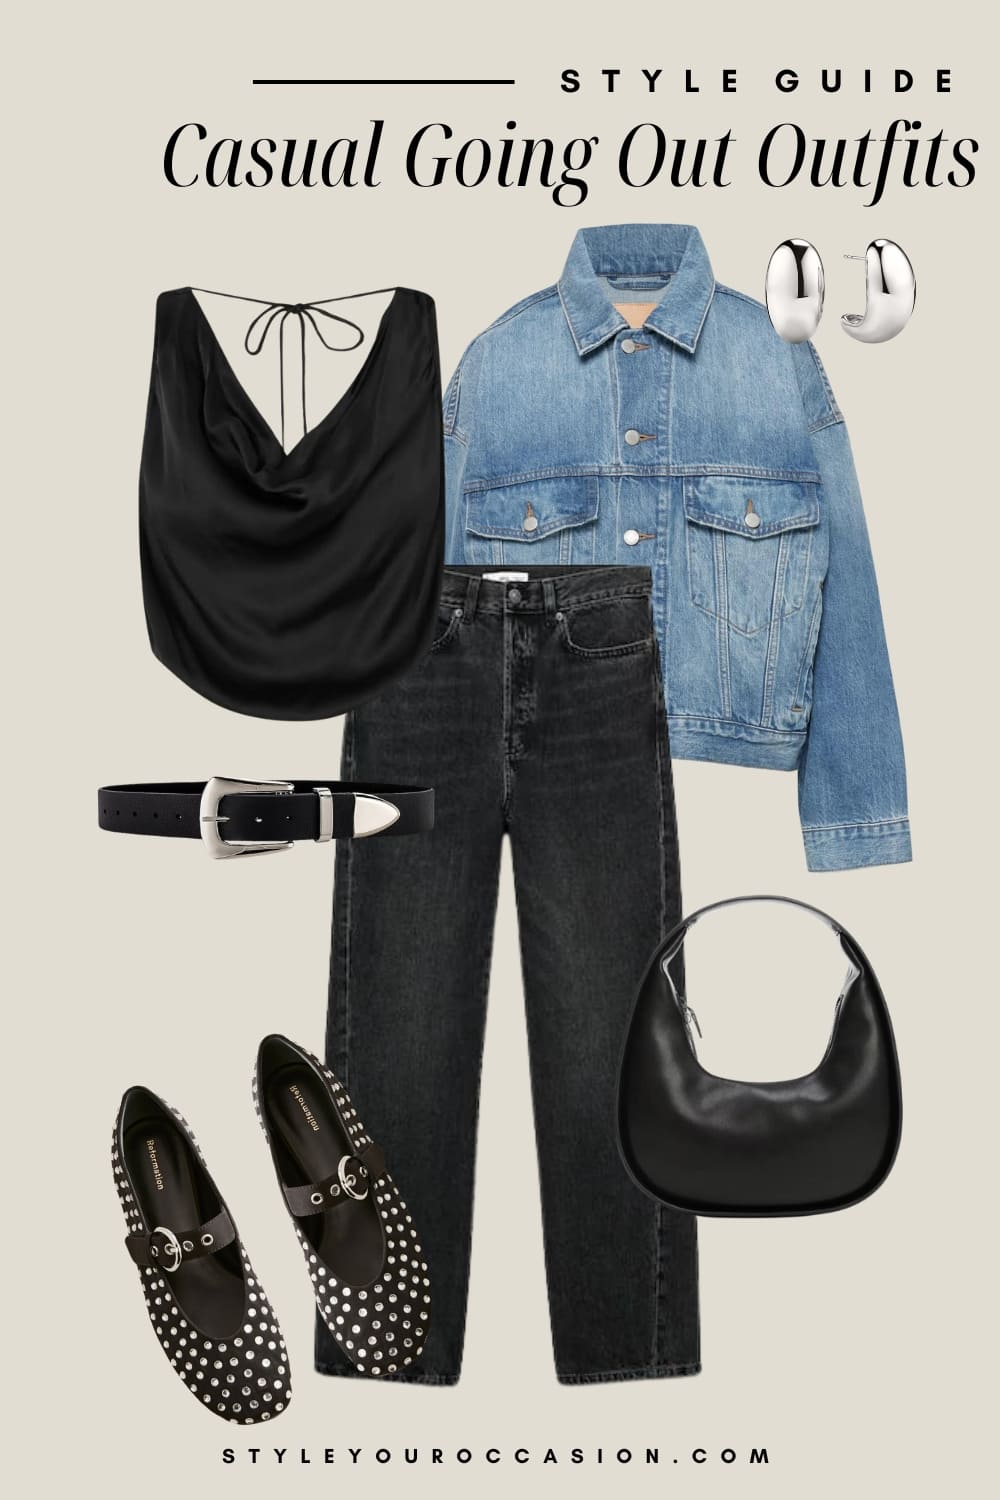 Outfit styling graphic with black jeans, a black silk top, a light wash denim jacket, black accessories and black studded ballet flats.